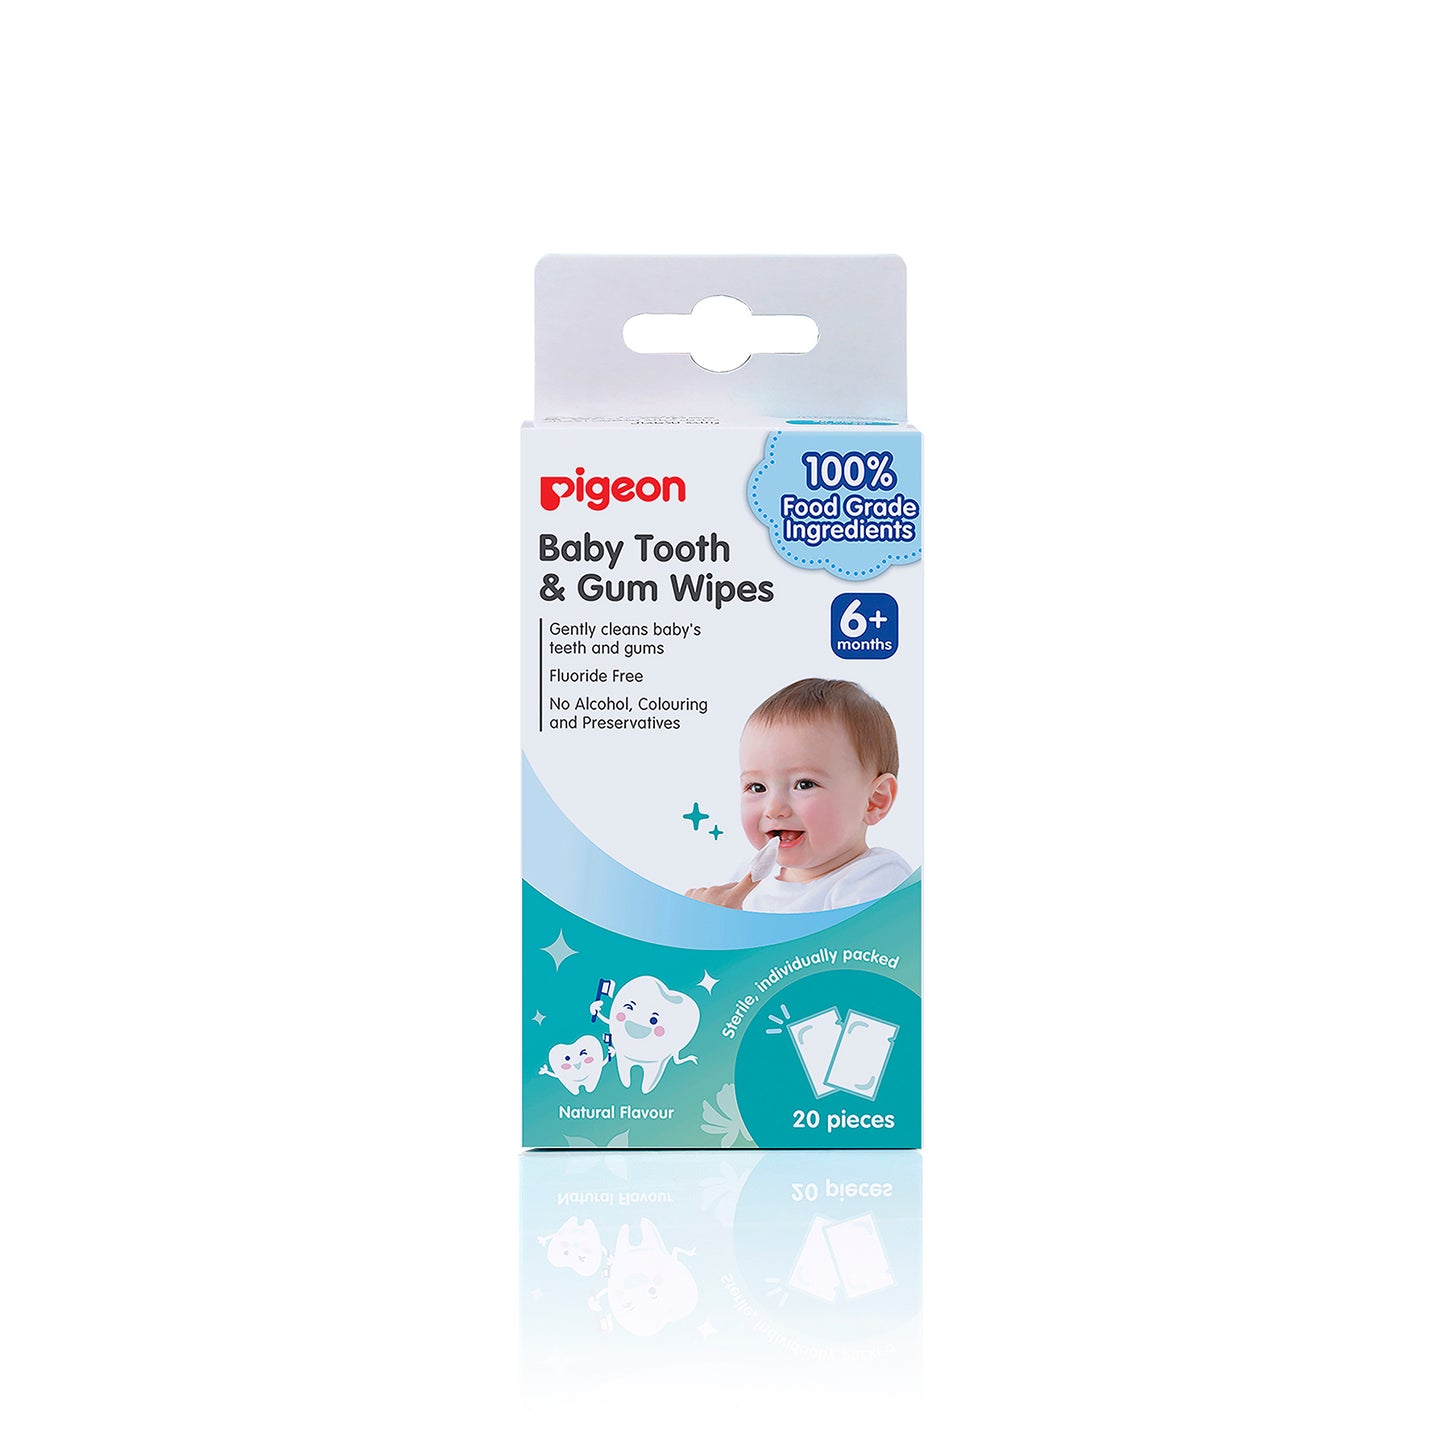 Pigeon Baby Tooth & Gum Wipes Natural 20s